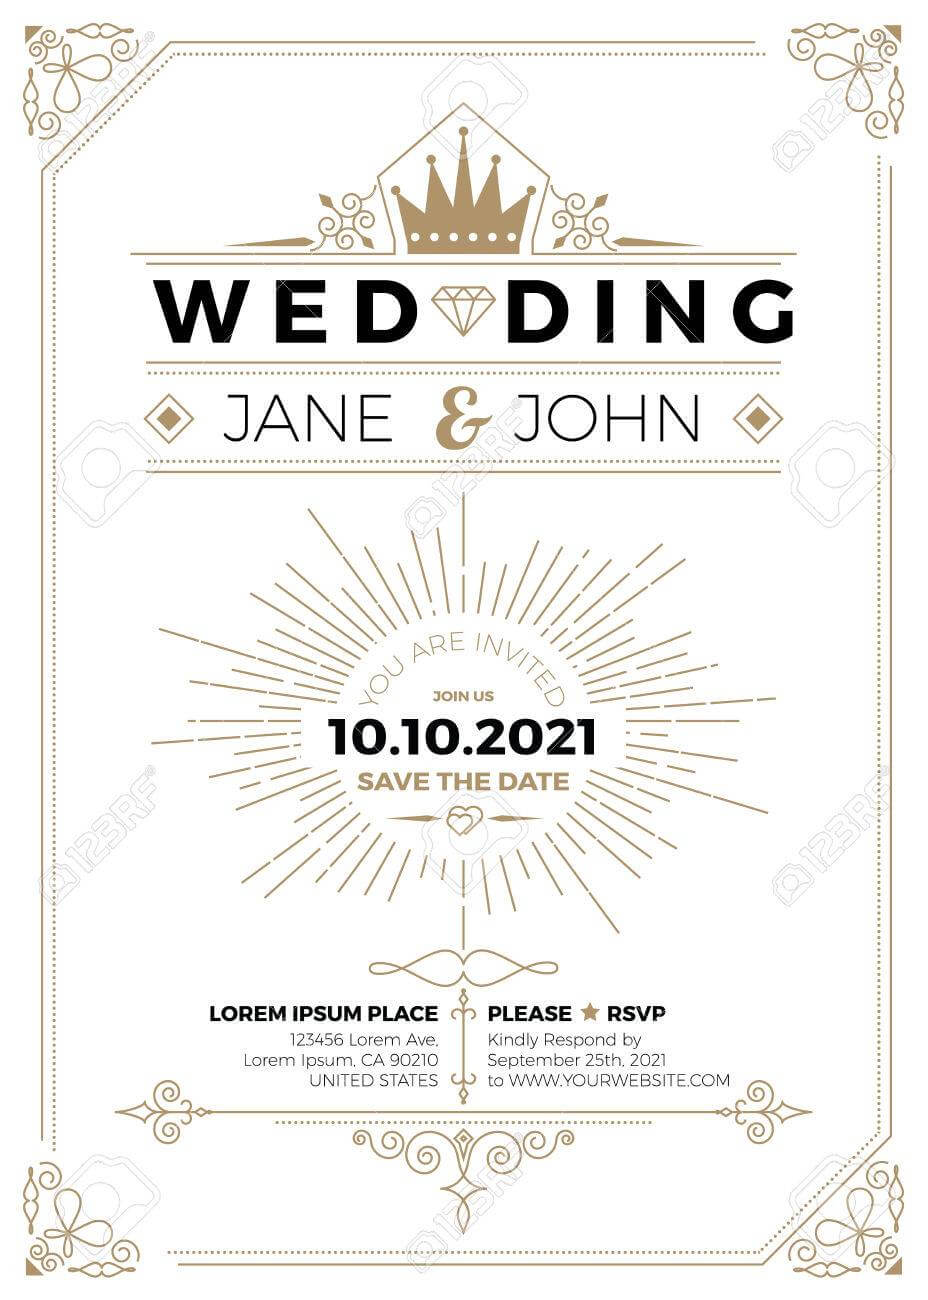 Vintage Wedding Invitation Card A5 Size Frame Layout Print Template Pertaining To Wedding Card Size Template